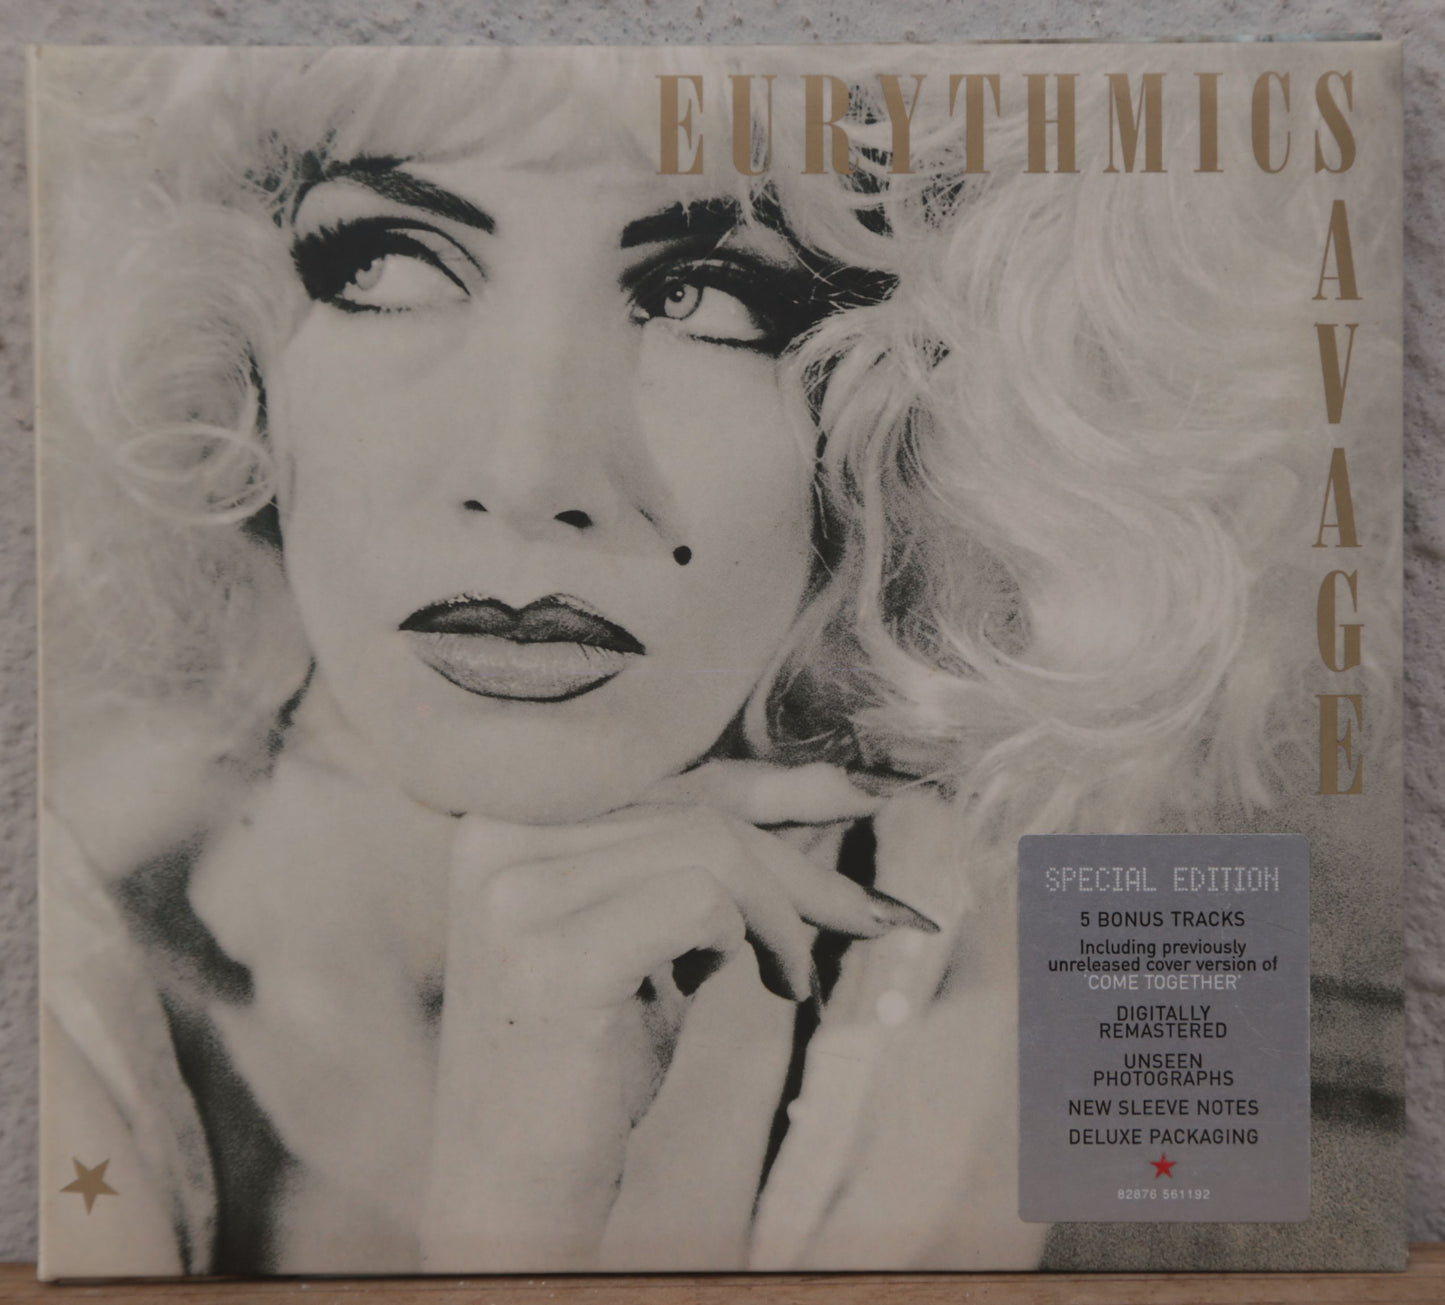 Eurythmics - Savage (special collector's edition) cd